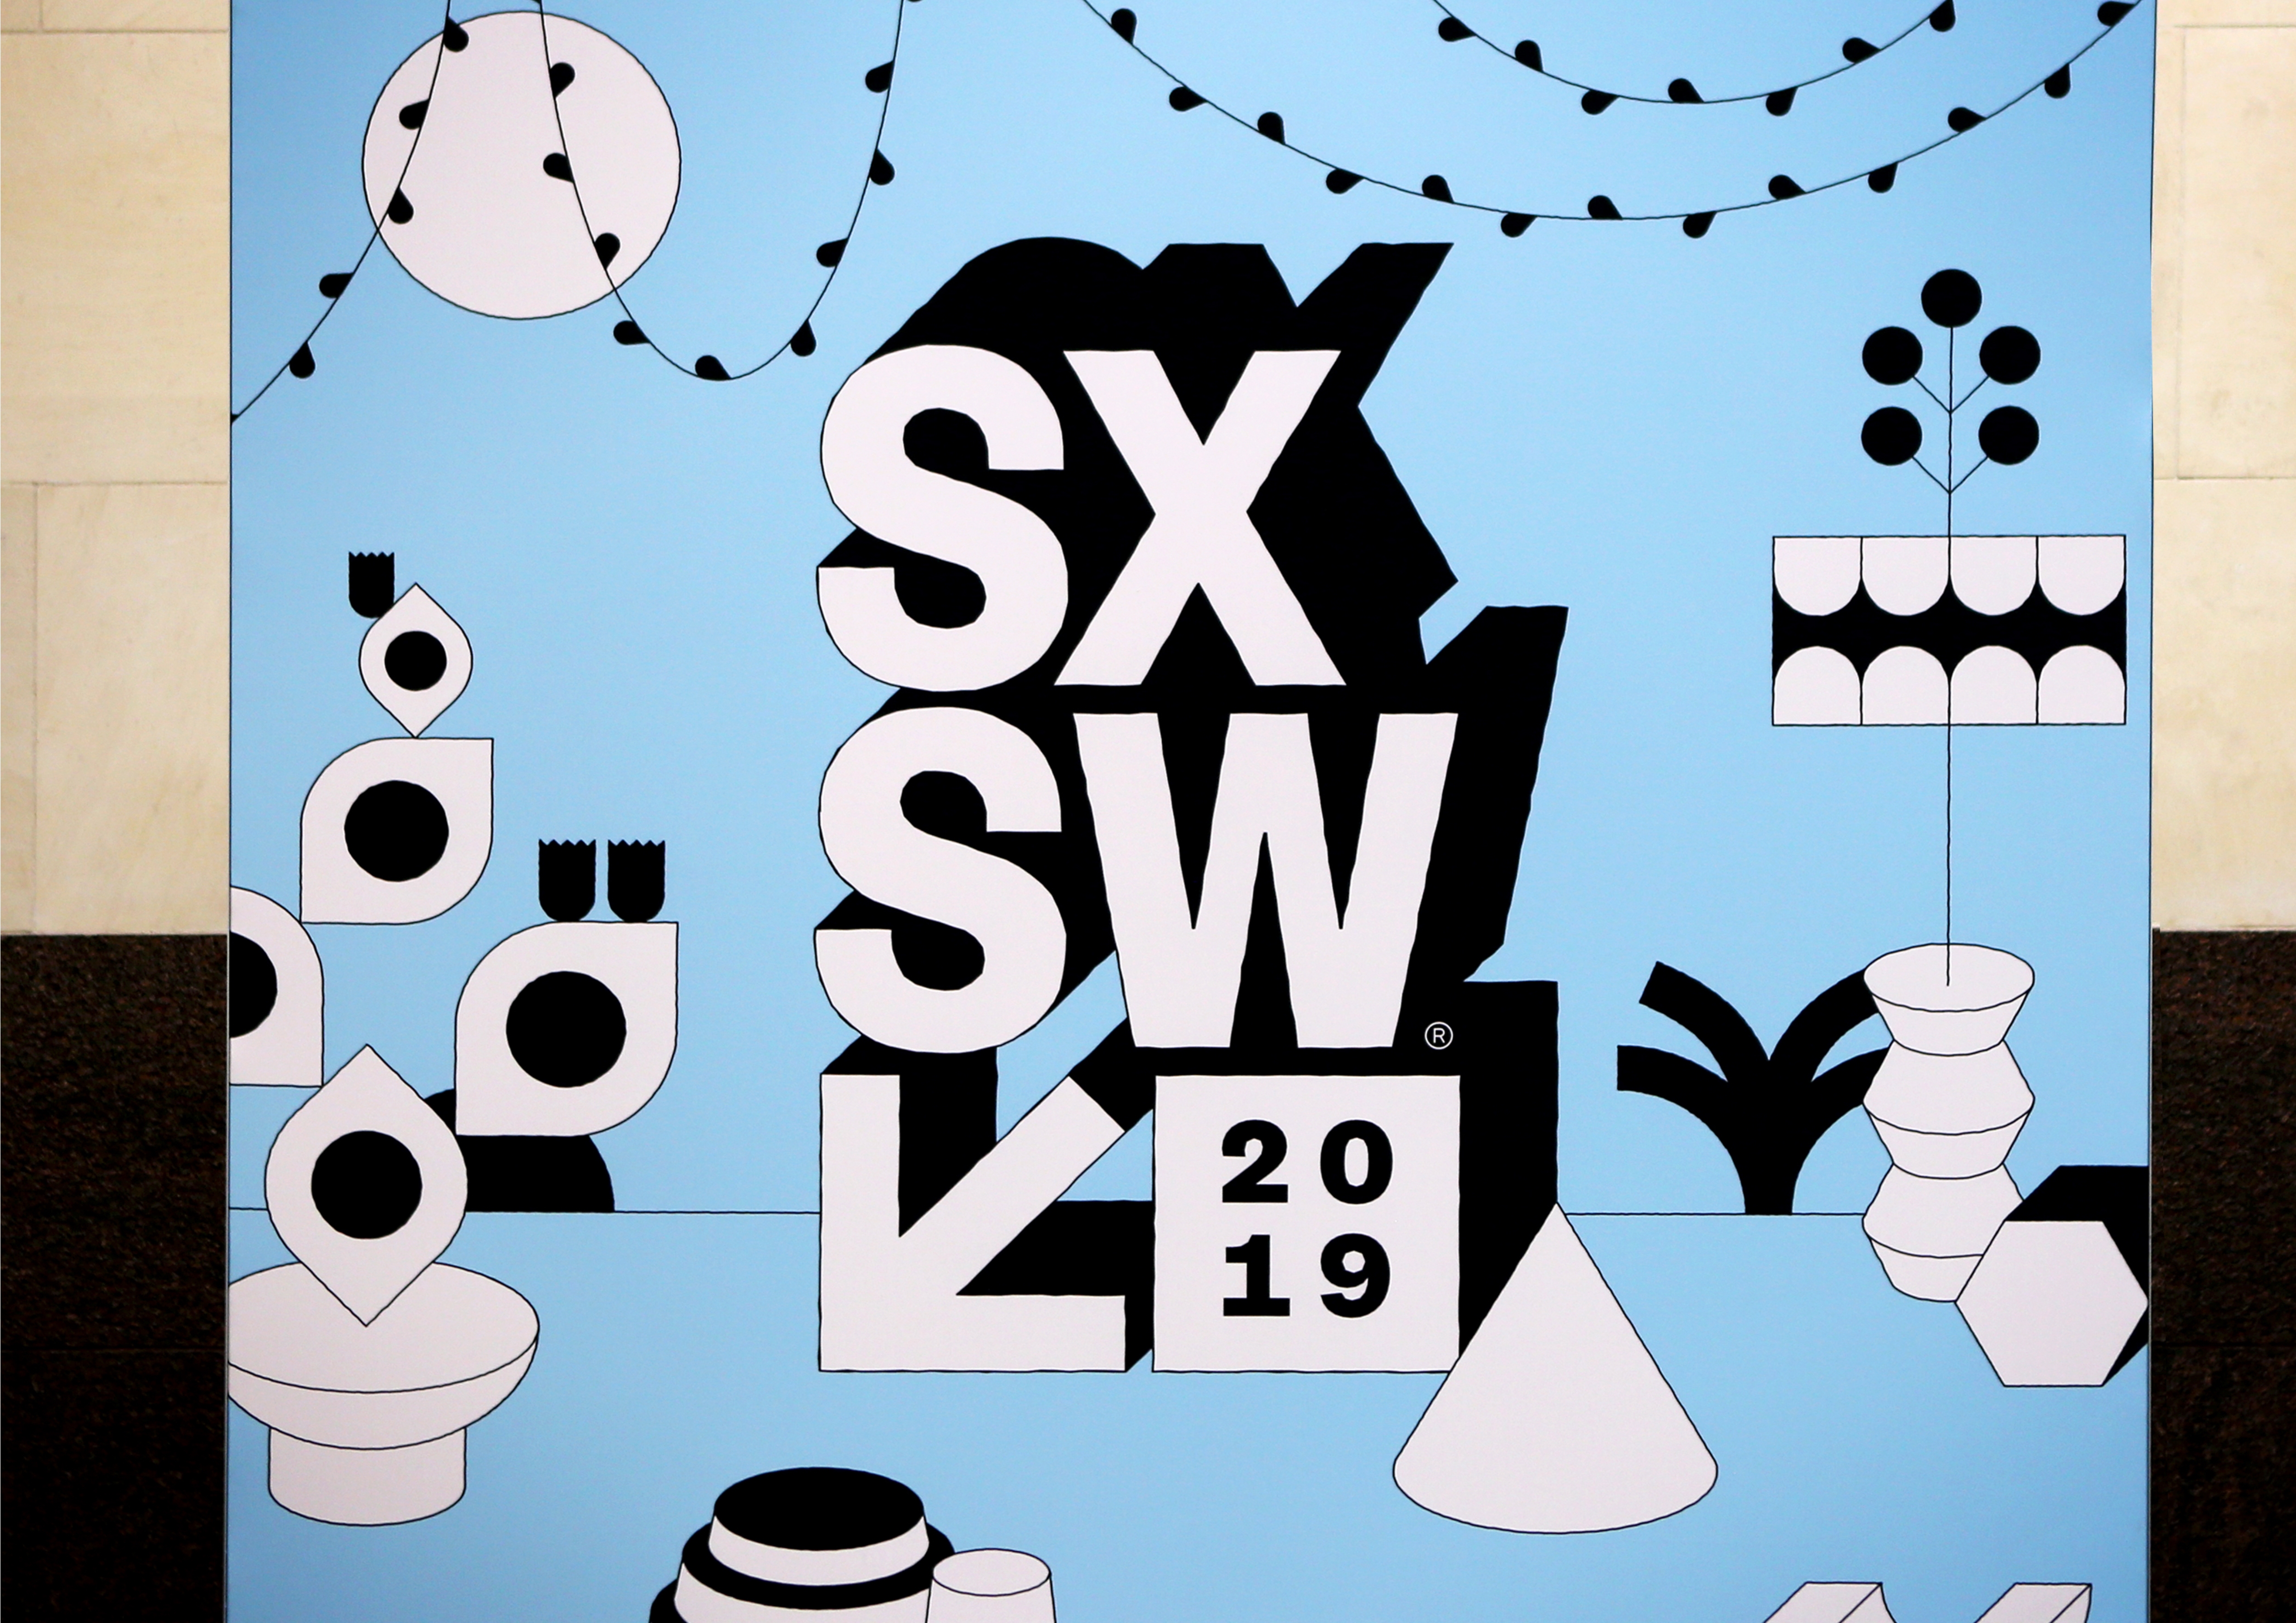 South by Southwest. Music festival in Texas.